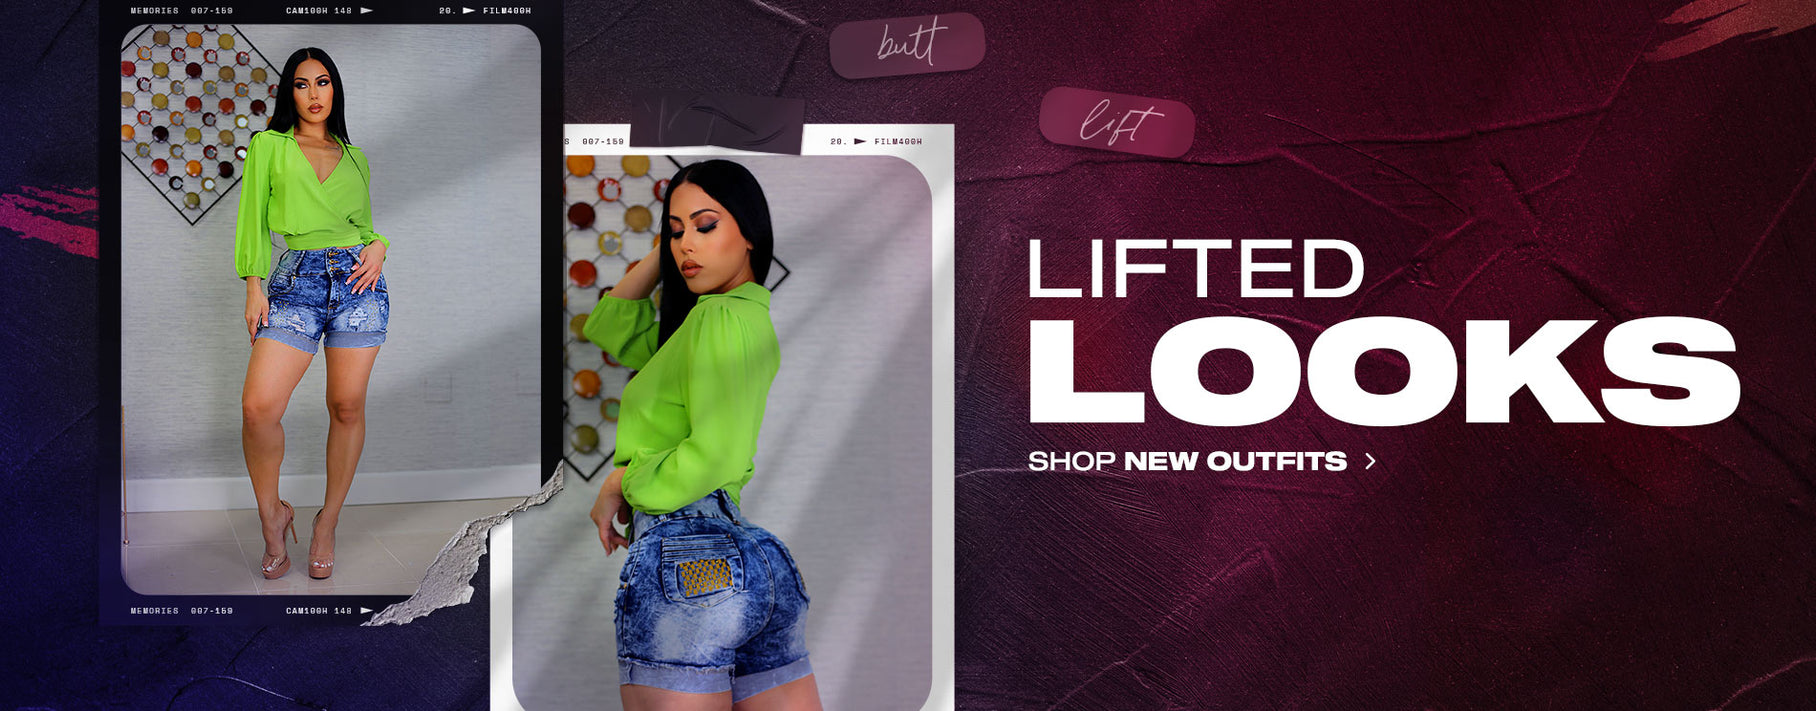 Lifted Looks: Shop New Outfits